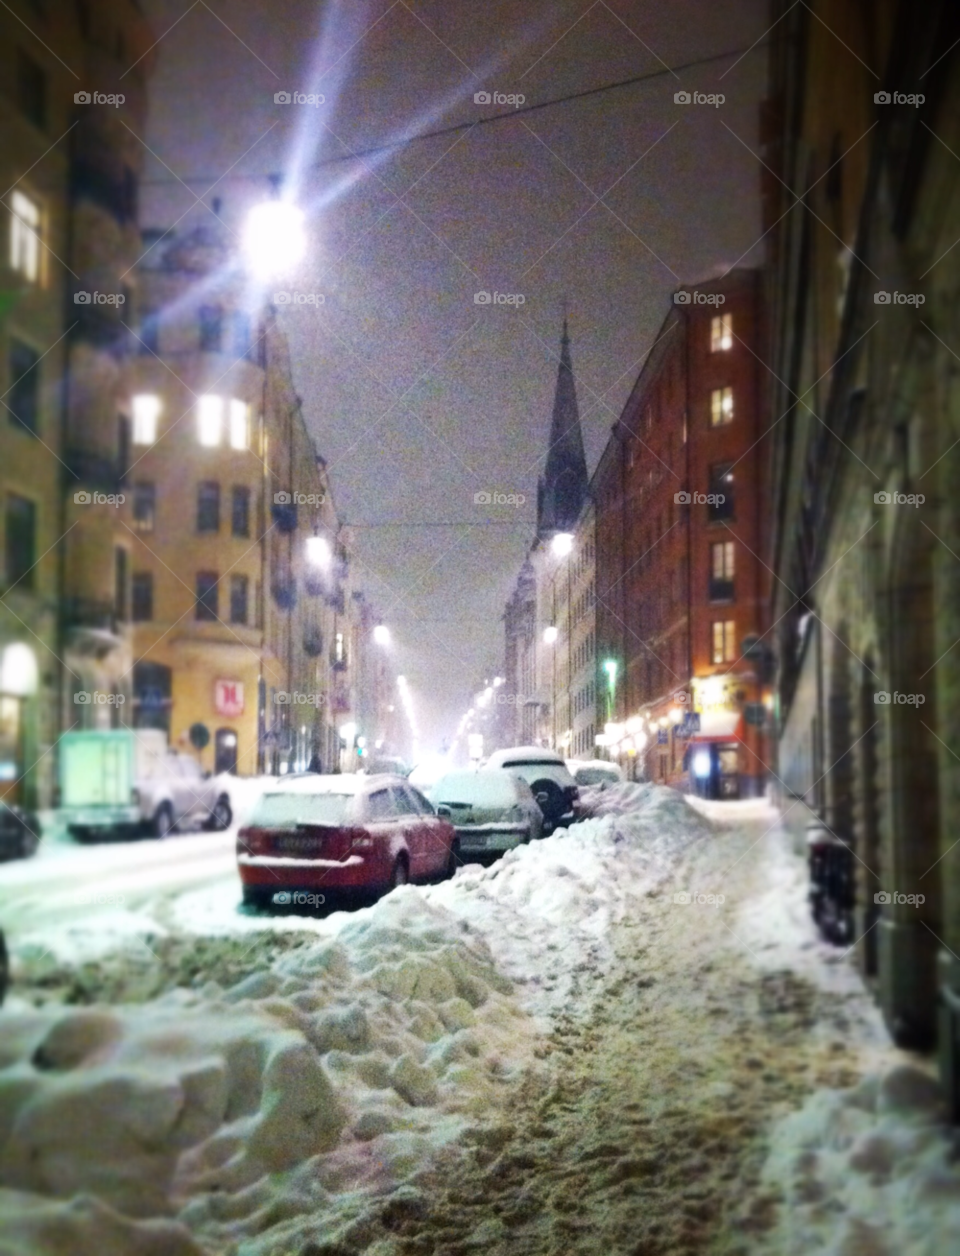 Snow in The city